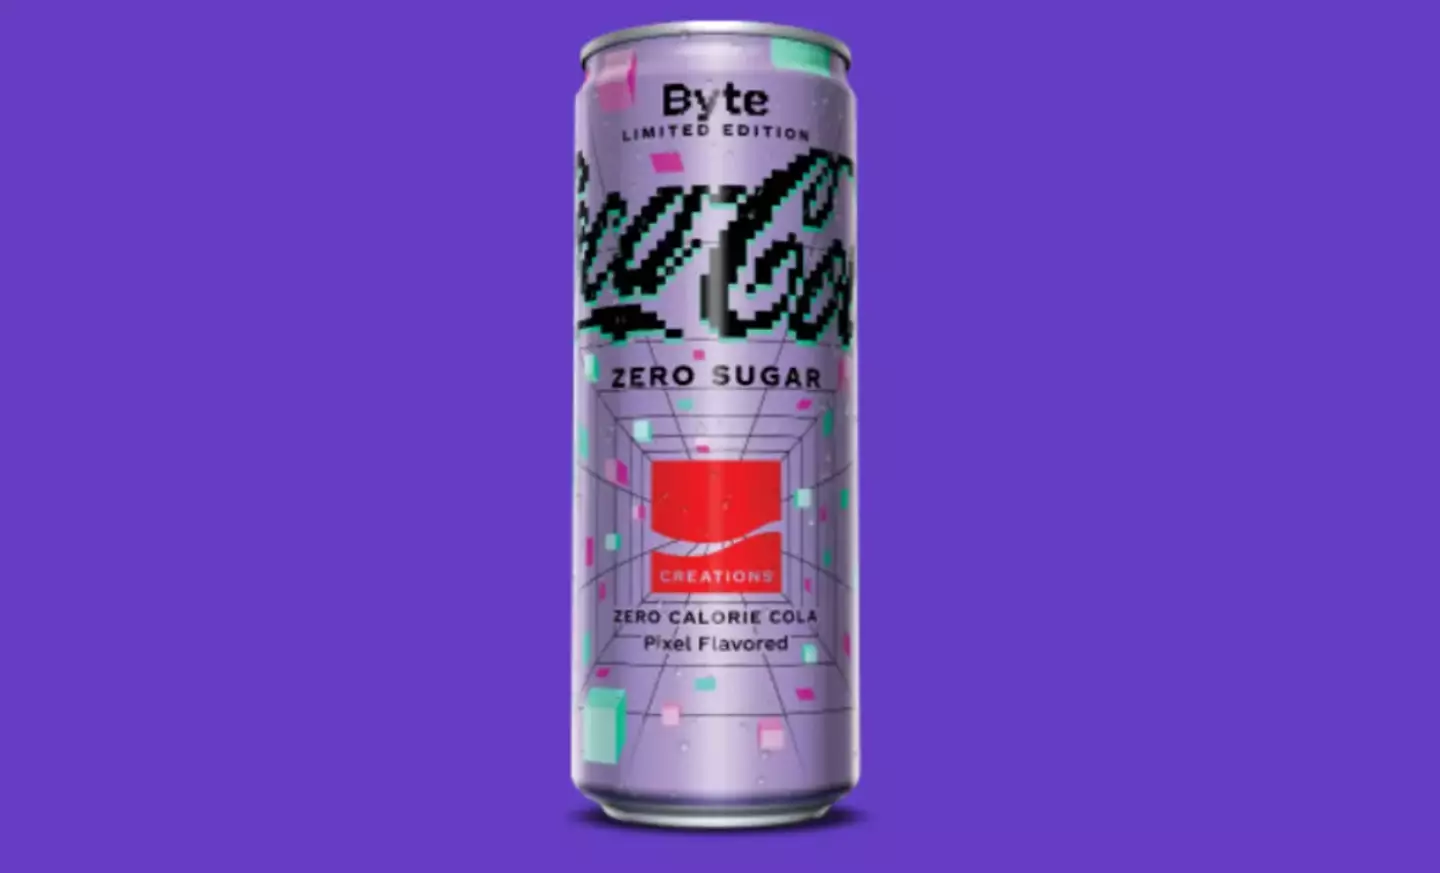 Coke said its ‘byte’ flavour was ‘an amazing nod to gamers’.